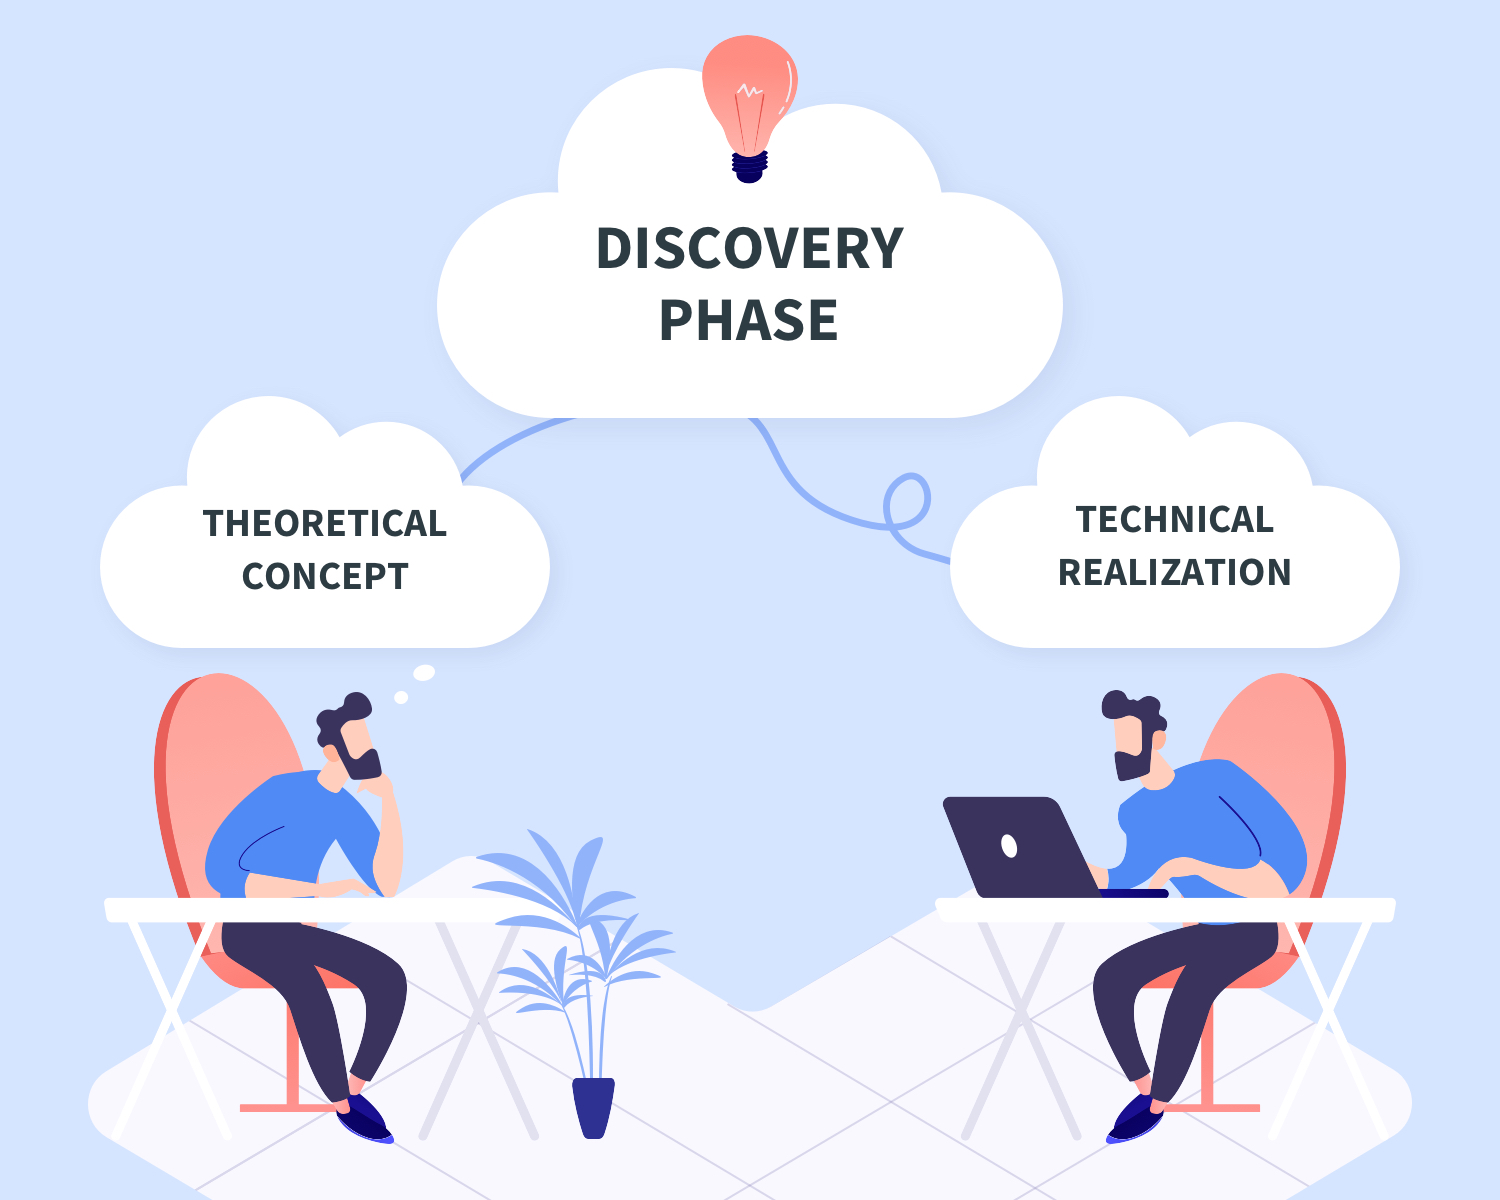 How to make the discovery phase valuable